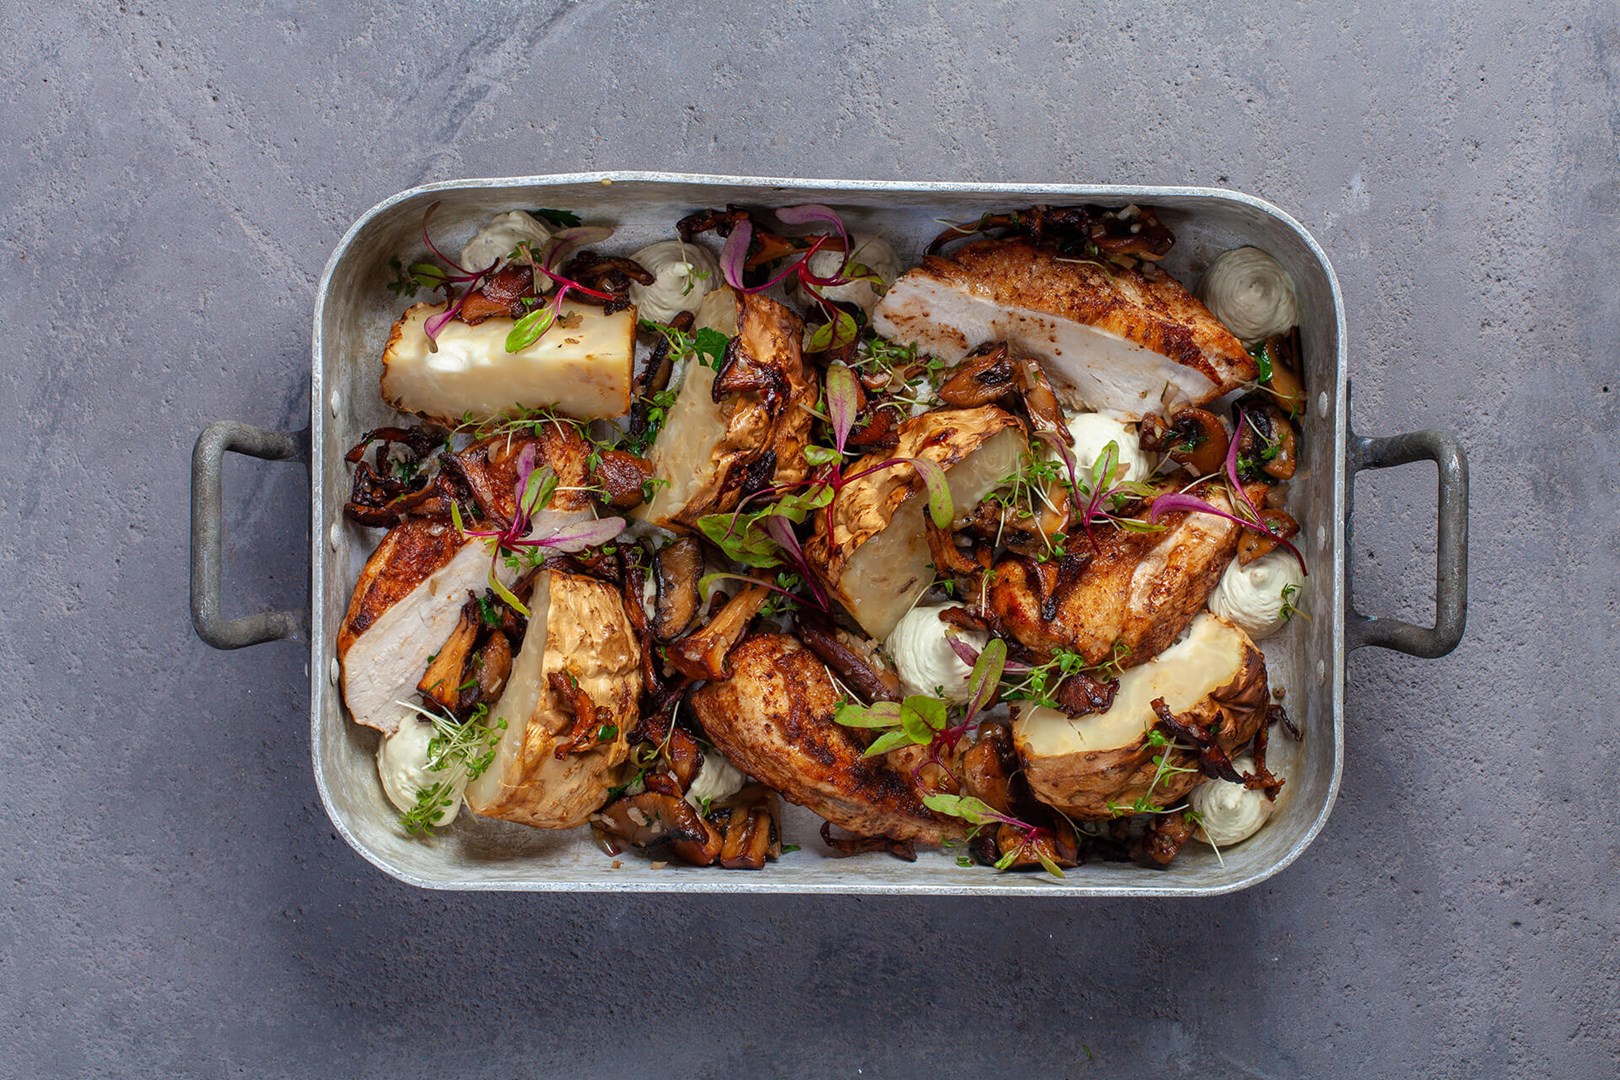  Oven tray with celeriac, chicken and mushrooms